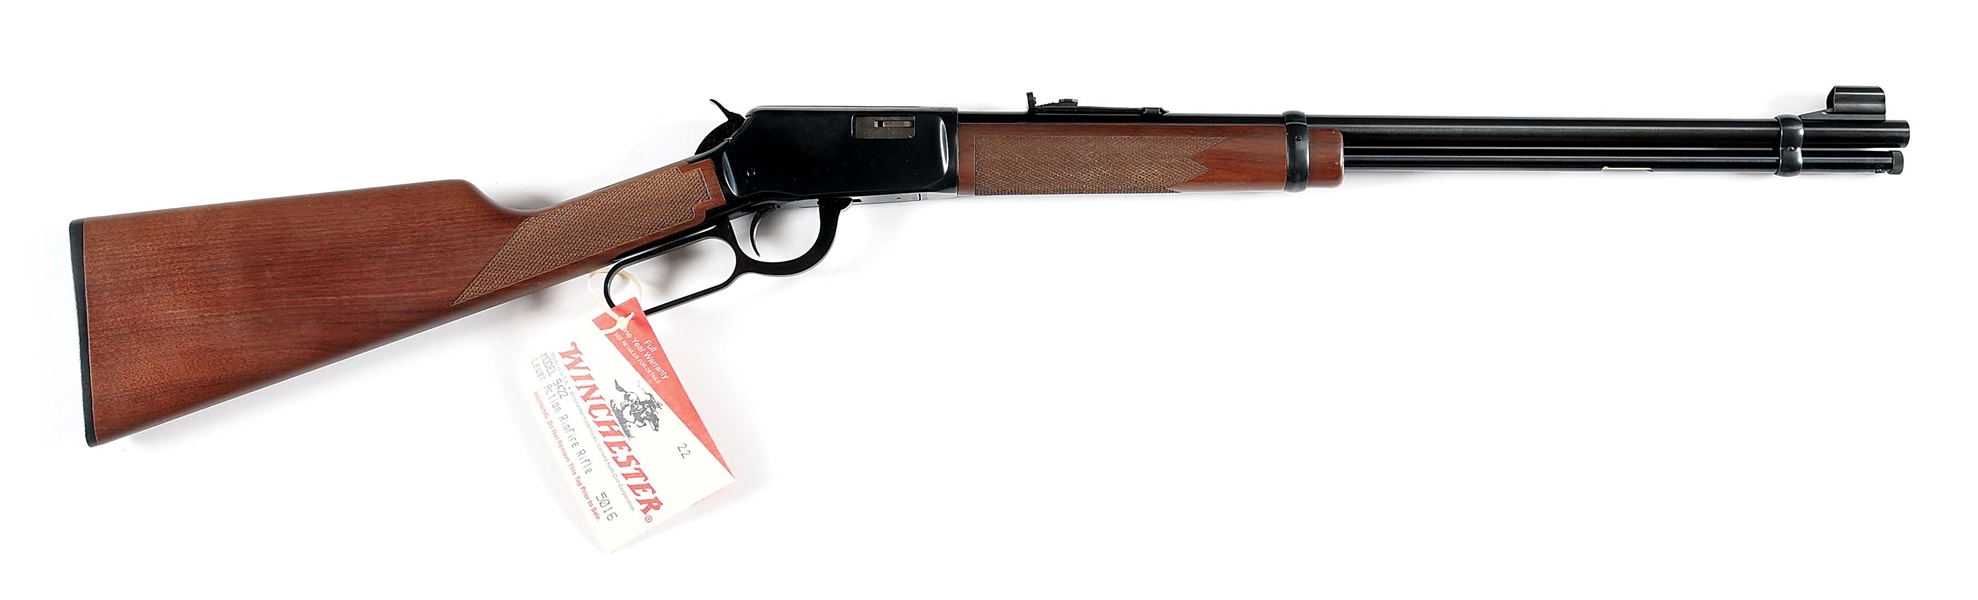 (M) WINCHESTER 9422 .22 LR LEVER ACTION RIFLE.